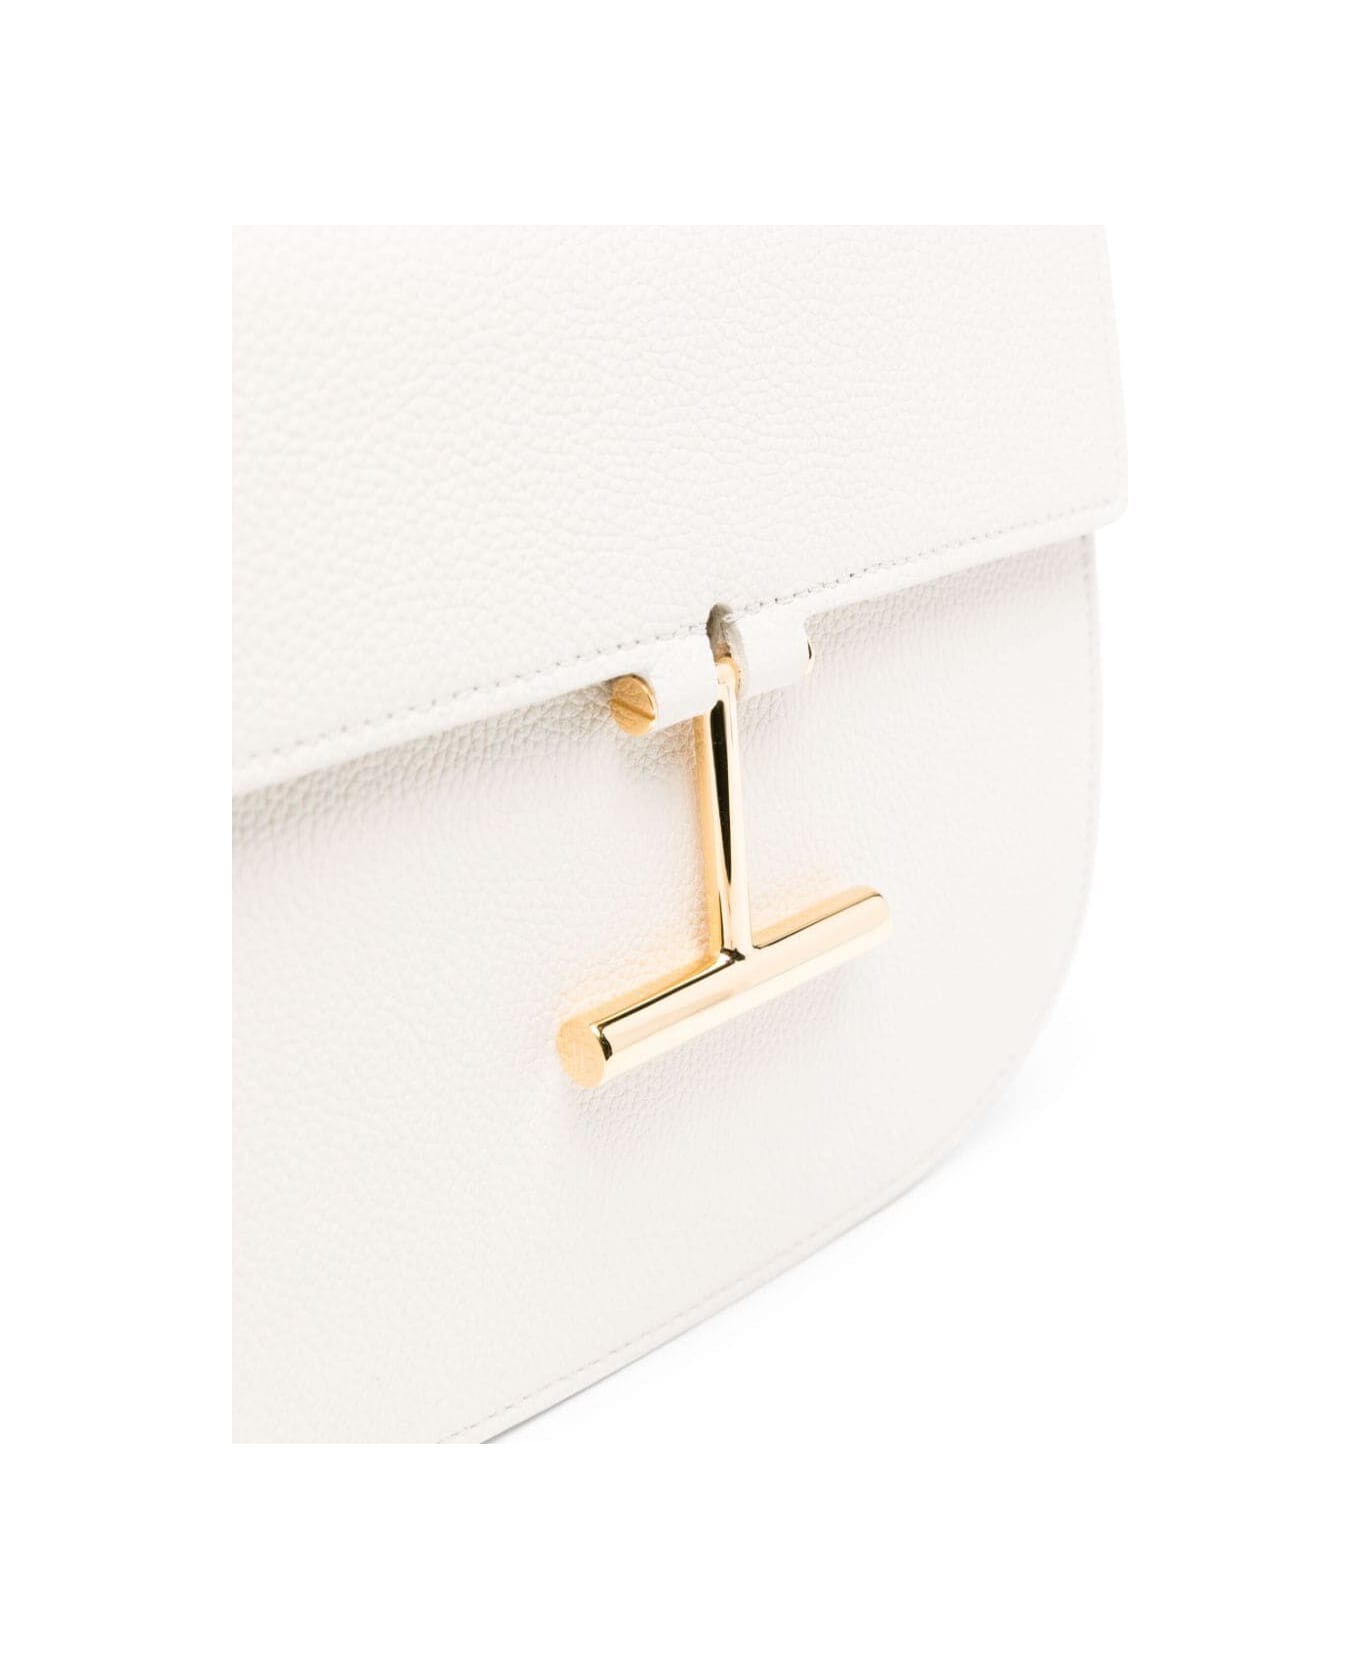 Tom Ford Shoulder And Crossbody Day Bag - White